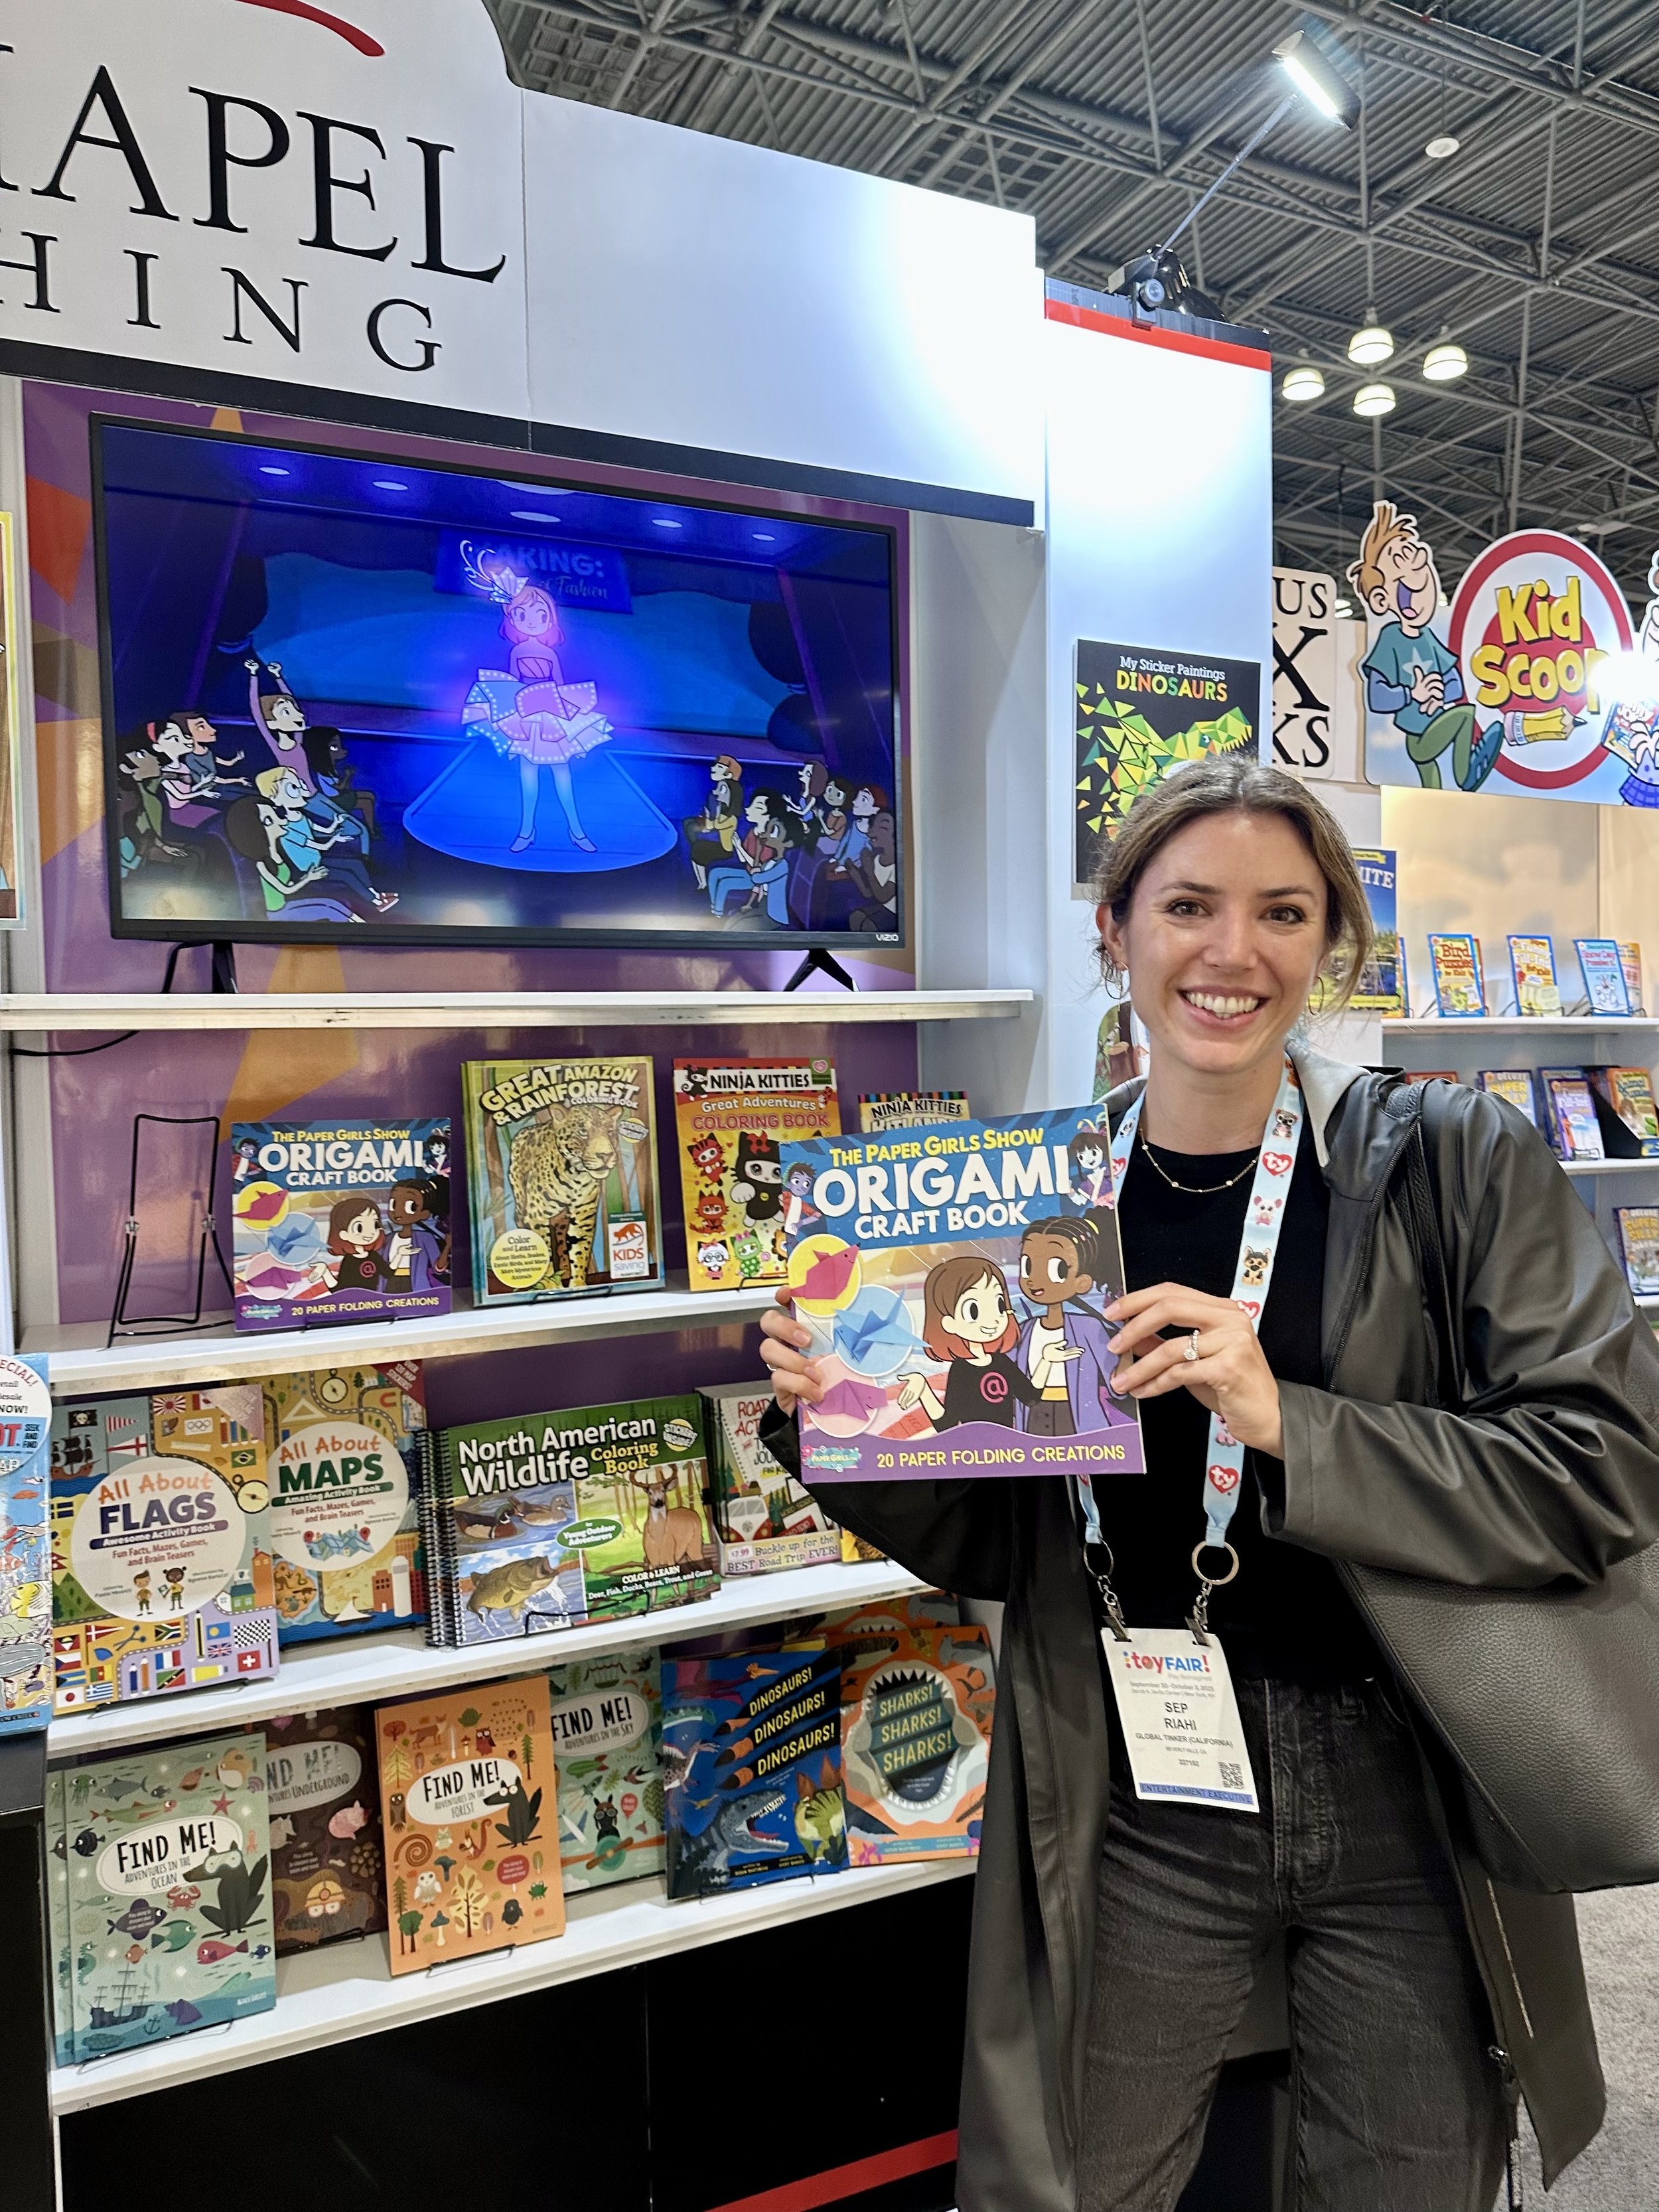 OLIVIA LEVENSON PROMOTING 'THE PAPER GIRLS SHOW ORIGAMI CRAFT BOOK' WITH FOX CHAPEL PUBLISHING - NY TOY FAIR, SEP '23